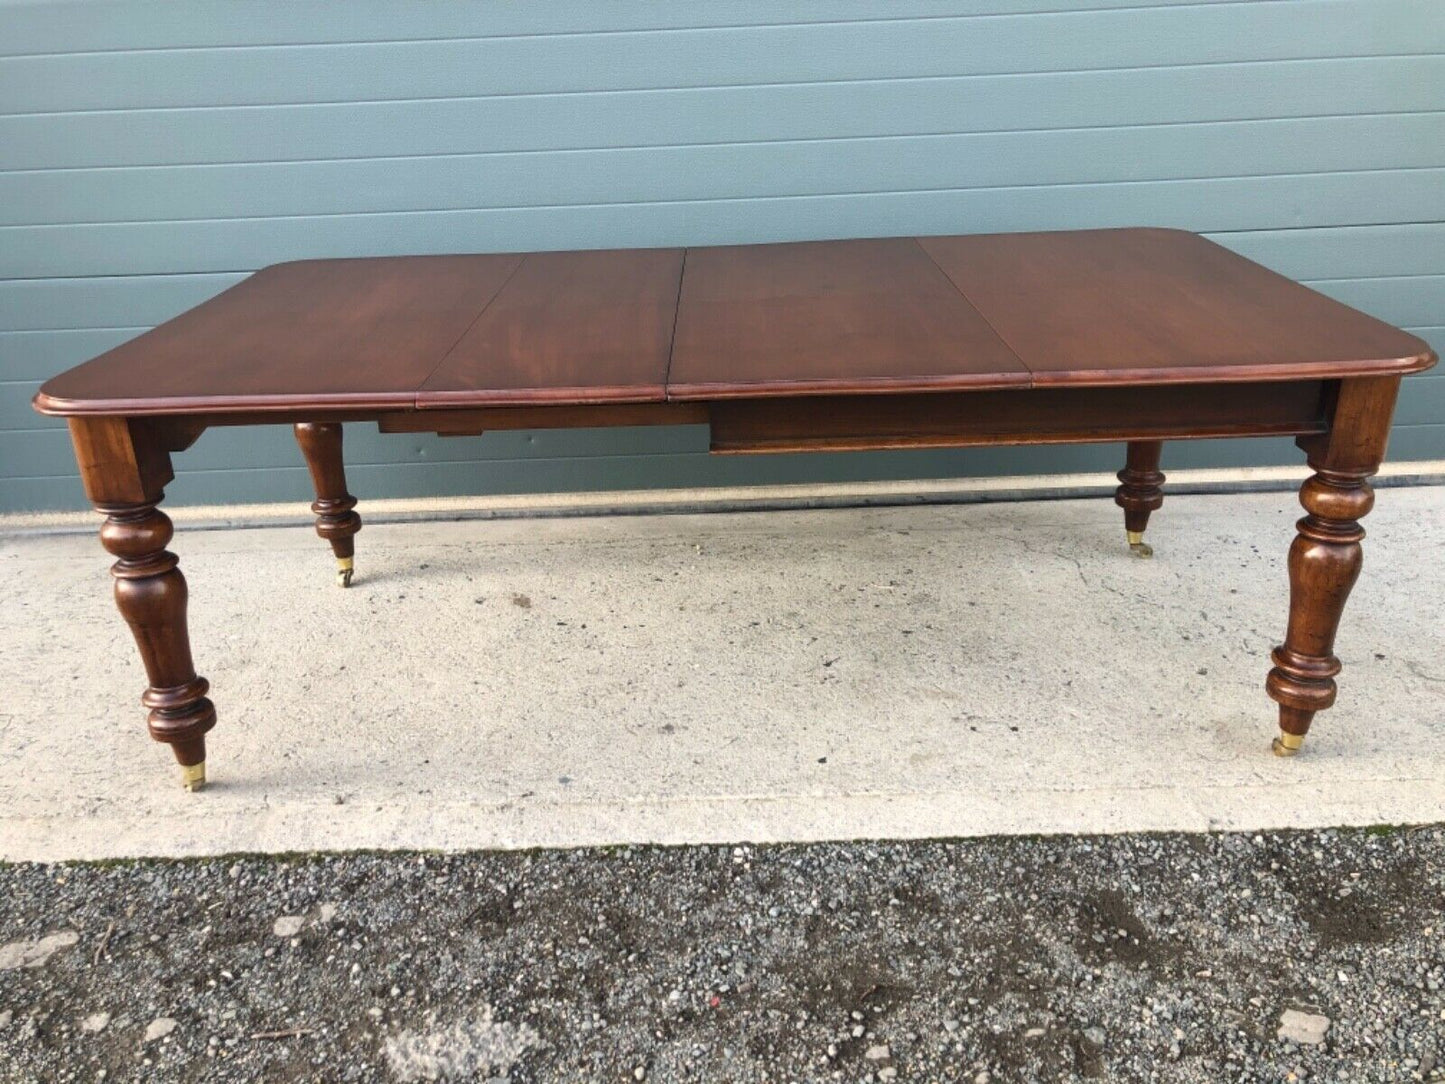 Antique Mahogany Extending Dining Table / Solid Mahogany Table ( SOLD )